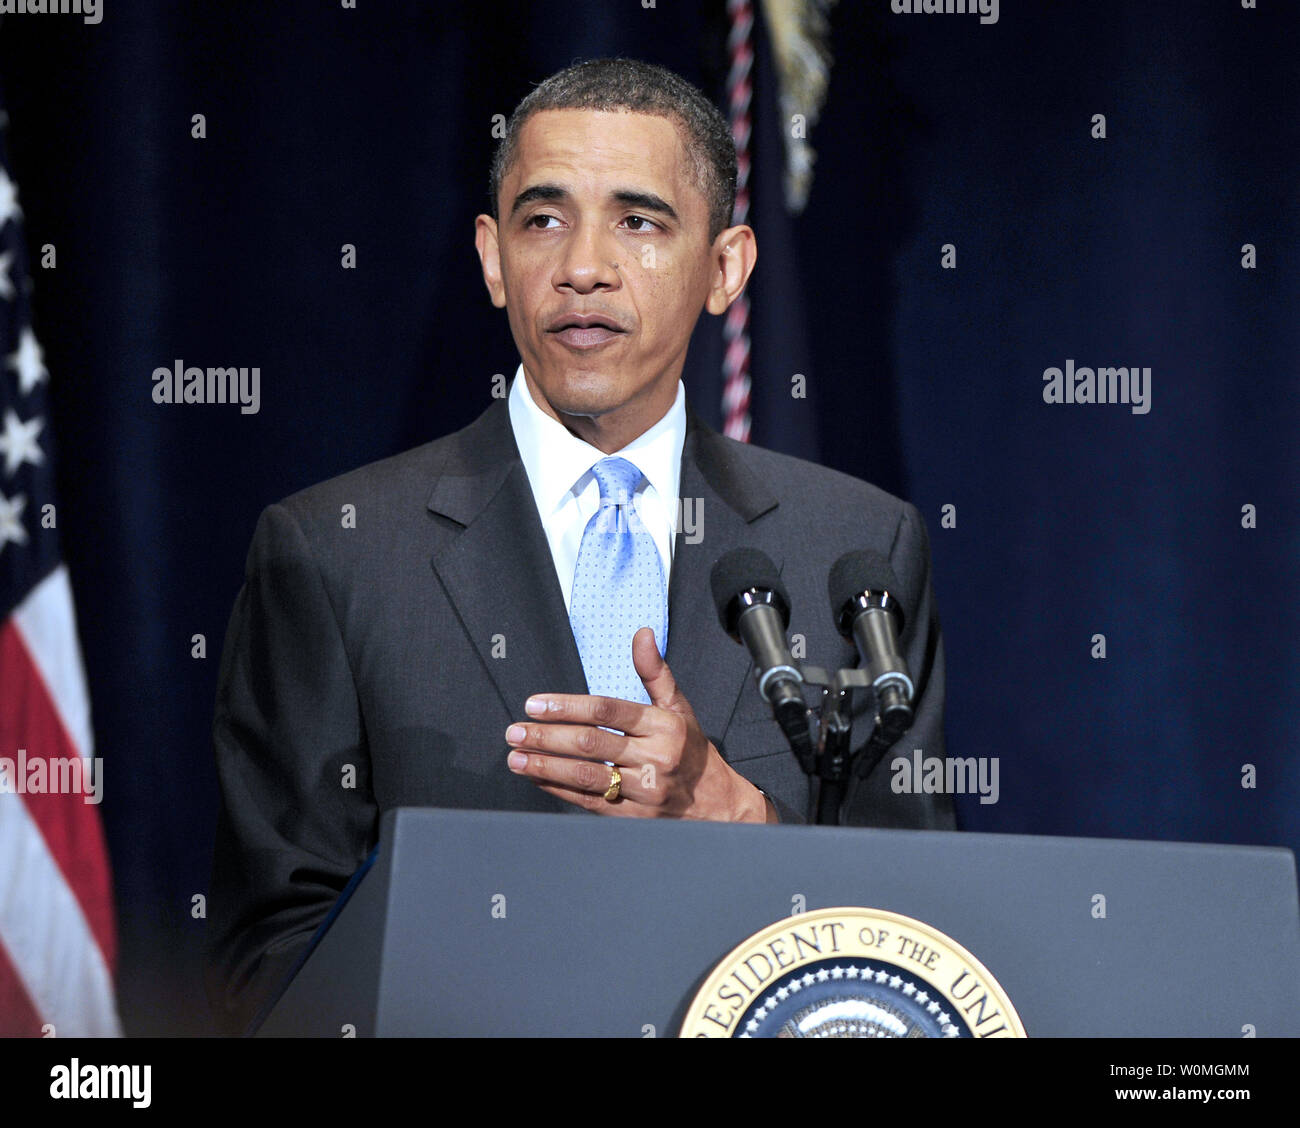 U.S. President Barack Obama delivers remarks to the Business Council at the Park Hyatt Hotel in Washington on May 4, 2010. In his remarks the President also spoke about the attempted bombing in Times Square.  UPI/Ron SachsPool Stock Photo